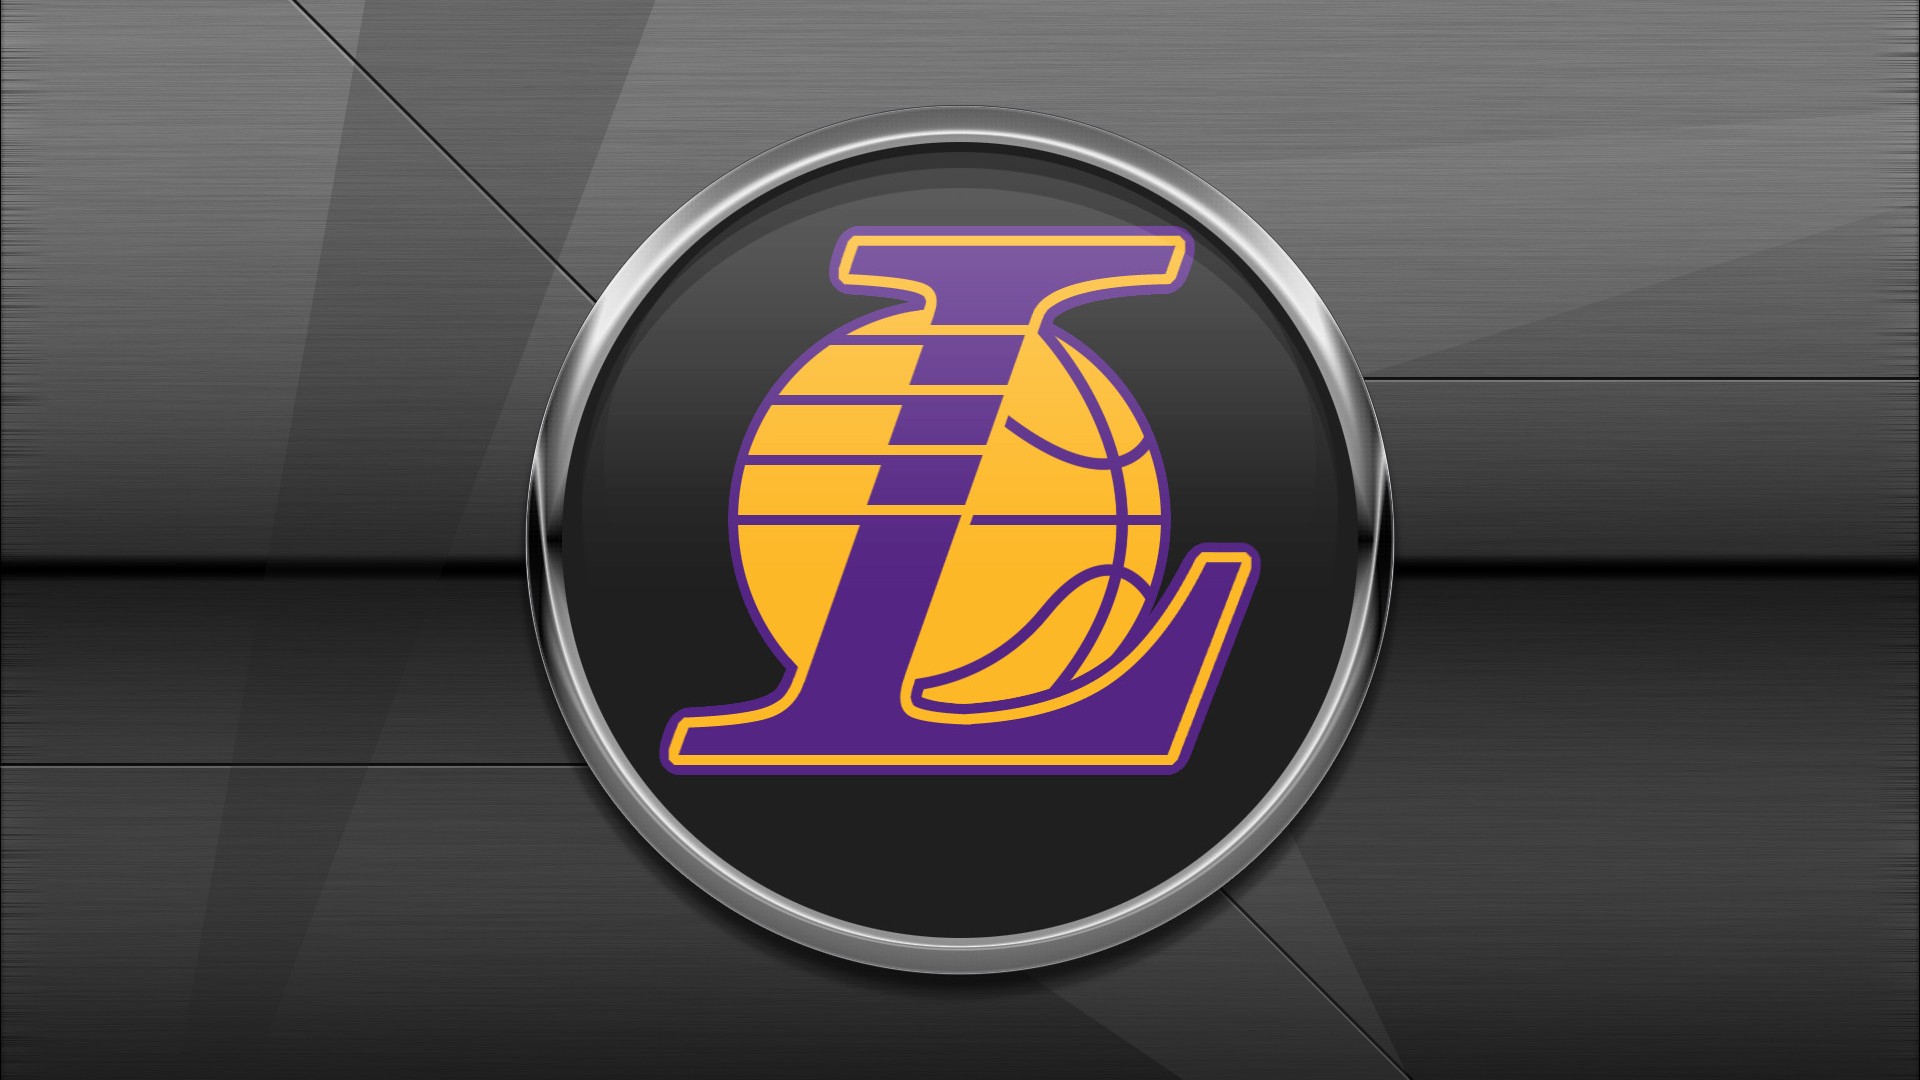 Wallpapers Los Angeles Lakers with image dimensions 1920x1080 pixel. You can make this wallpaper for your Desktop Computer Backgrounds, Windows or Mac Screensavers, iPhone Lock screen, Tablet or Android and another Mobile Phone device